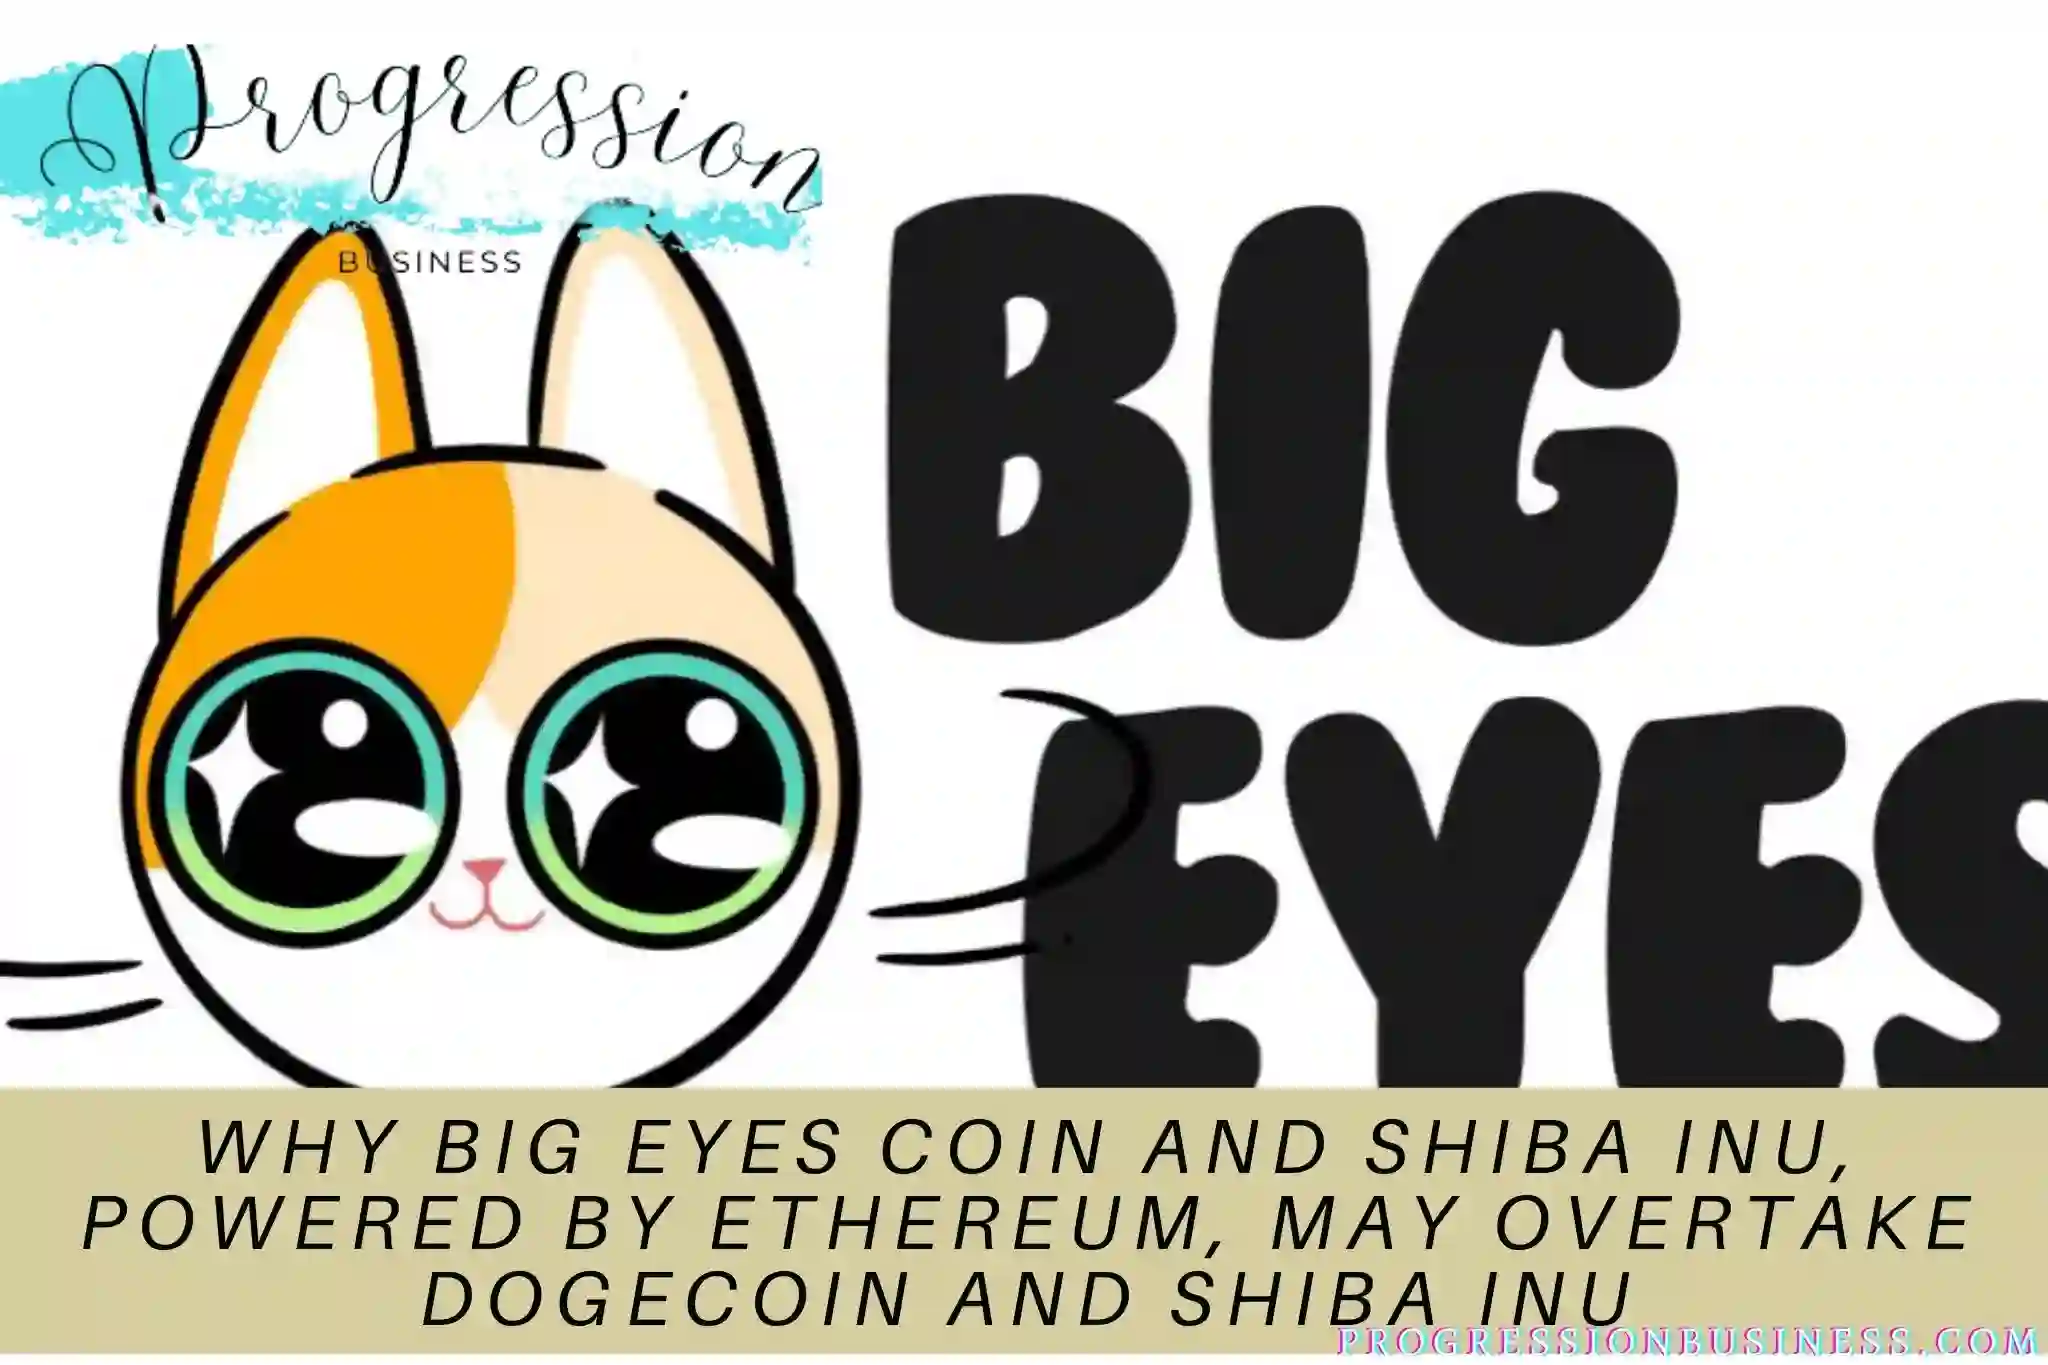 WHY BIG EYES COIN AND SHIBA INU, POWERED BY ETHEREUM, MAY OVERTAKE DOGECOIN AND SHIBA INU